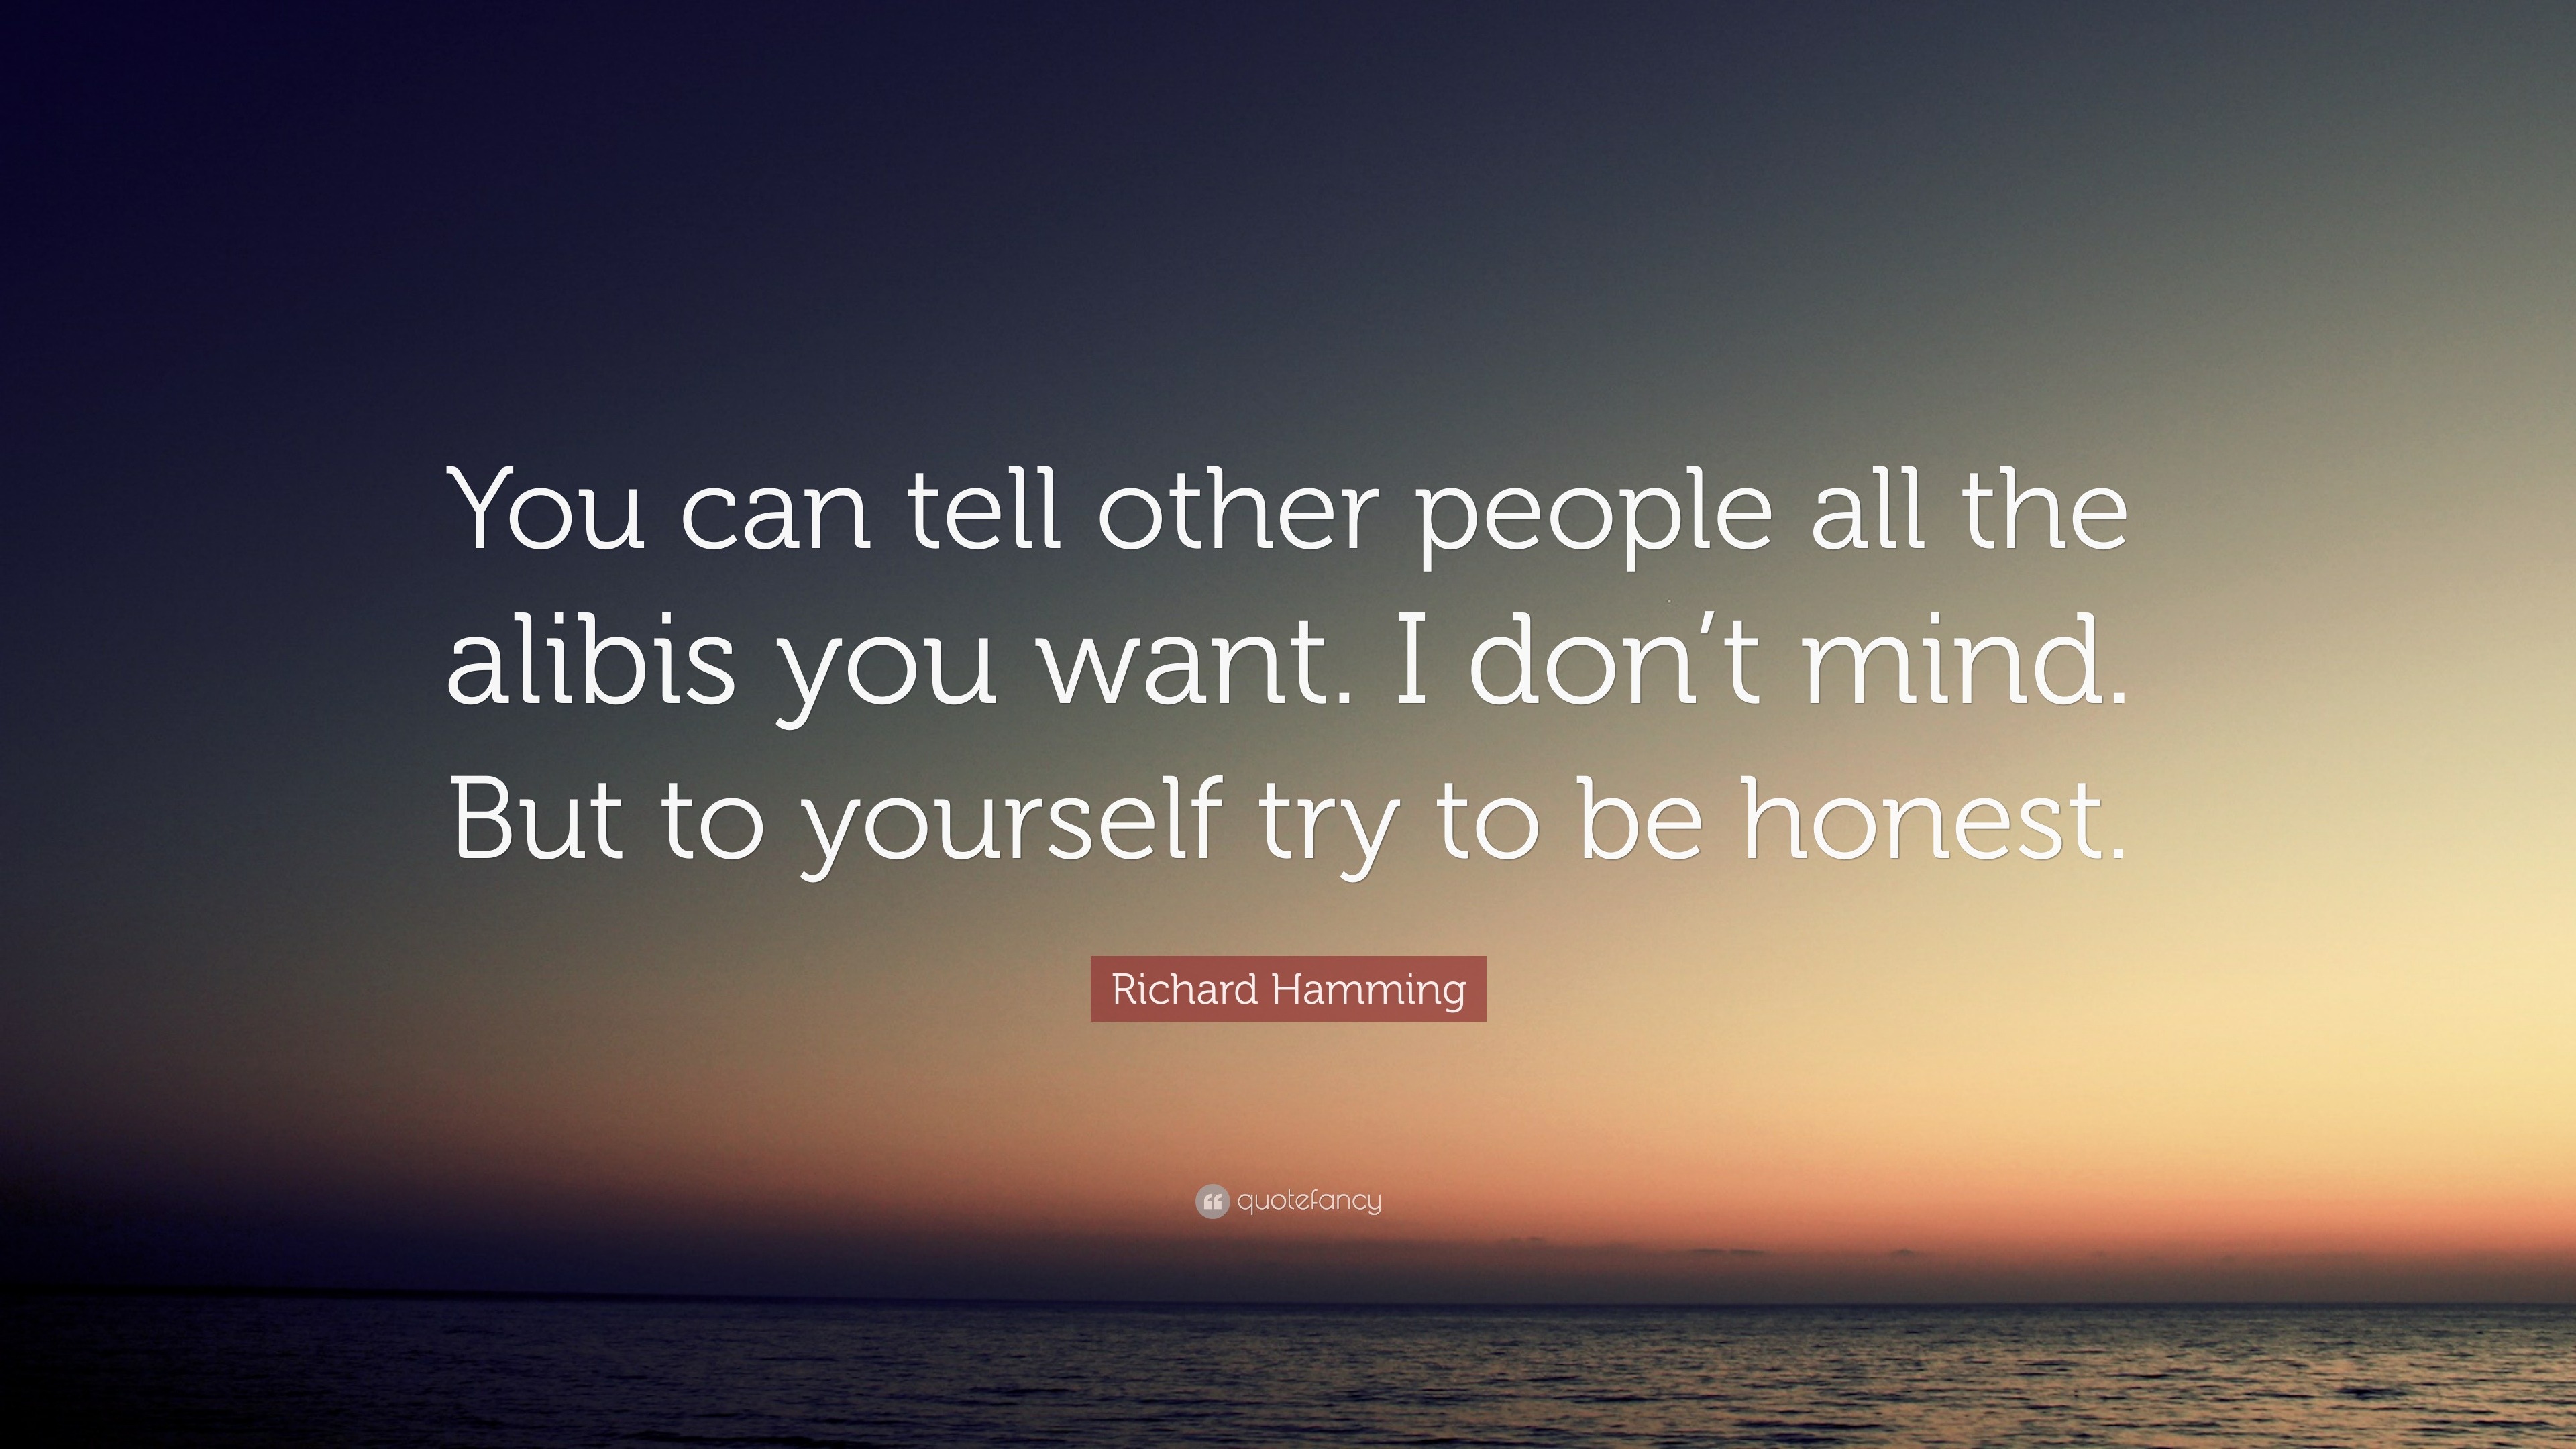 Richard Hamming Quote: “You can tell other people all the alibis you want.  I don&#39;t